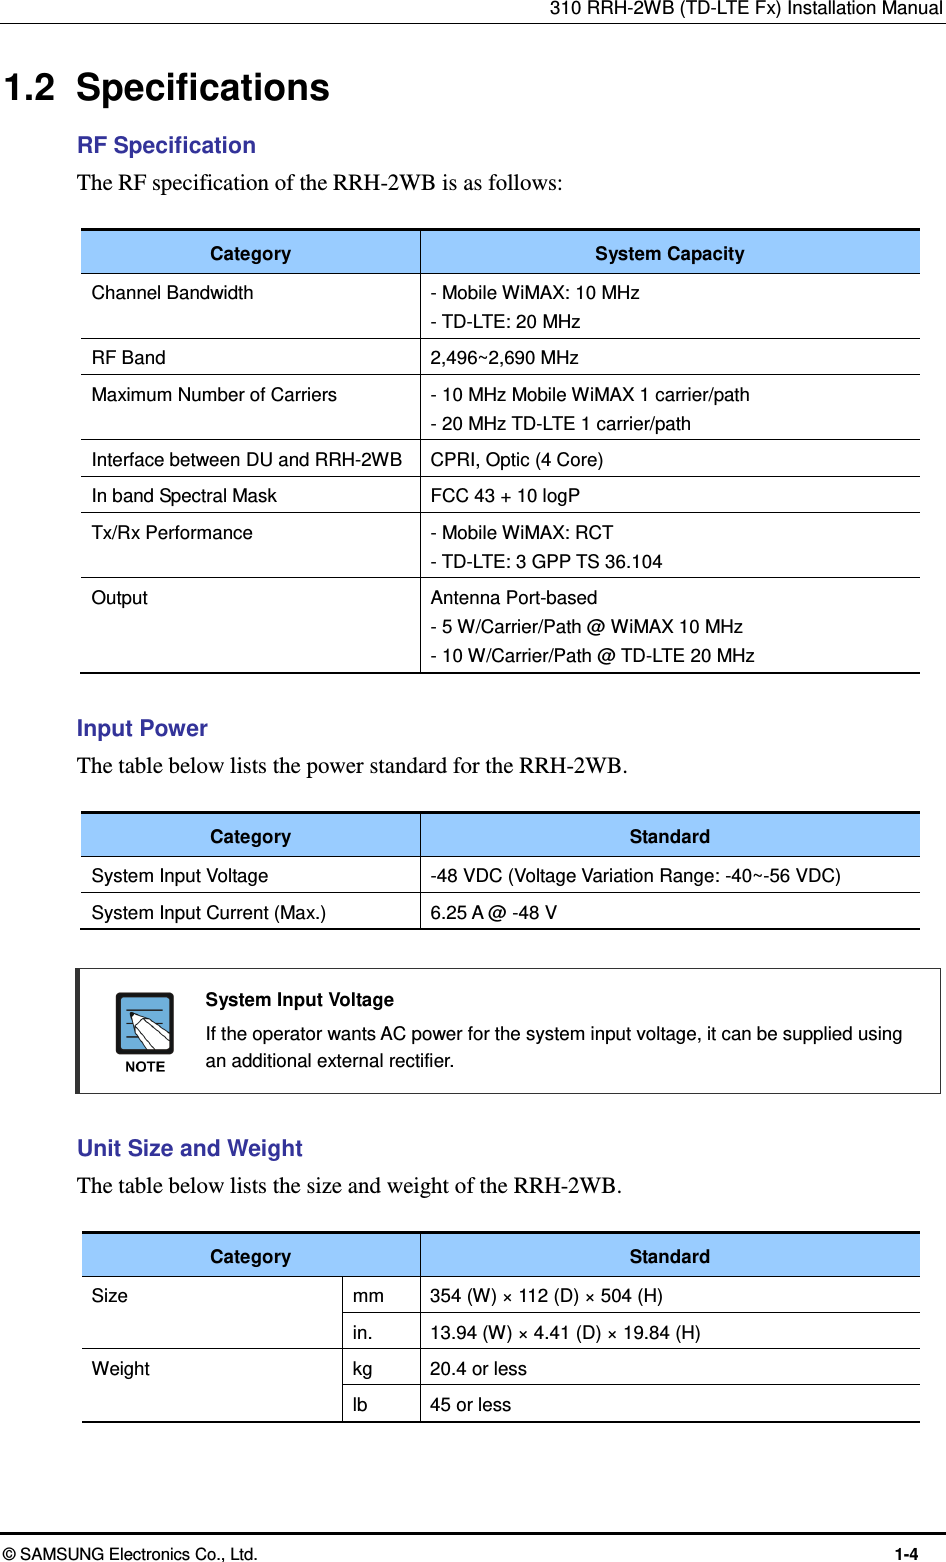 310 RRH-2WB (TD-LTE Fx) Installation Manual  © SAMSUNG Electronics Co., Ltd.  1-4 1.2  Specifications RF Specification The RF specification of the RRH-2WB is as follows:  Category System Capacity Channel Bandwidth - Mobile WiMAX: 10 MHz - TD-LTE: 20 MHz RF Band 2,496~2,690 MHz Maximum Number of Carriers - 10 MHz Mobile WiMAX 1 carrier/path - 20 MHz TD-LTE 1 carrier/path Interface between DU and RRH-2WB CPRI, Optic (4 Core) In band Spectral Mask FCC 43 + 10 logP Tx/Rx Performance - Mobile WiMAX: RCT - TD-LTE: 3 GPP TS 36.104 Output   Antenna Port-based - 5 W/Carrier/Path @ WiMAX 10 MHz - 10 W/Carrier/Path @ TD-LTE 20 MHz  Input Power The table below lists the power standard for the RRH-2WB.    Category Standard System Input Voltage -48 VDC (Voltage Variation Range: -40~-56 VDC) System Input Current (Max.) 6.25 A @ -48 V   System Input Voltage   If the operator wants AC power for the system input voltage, it can be supplied using an additional external rectifier.  Unit Size and Weight The table below lists the size and weight of the RRH-2WB.  Category Standard Size mm 354 (W) × 112 (D) × 504 (H) in. 13.94 (W) × 4.41 (D) × 19.84 (H) Weight kg 20.4 or less lb 45 or less 